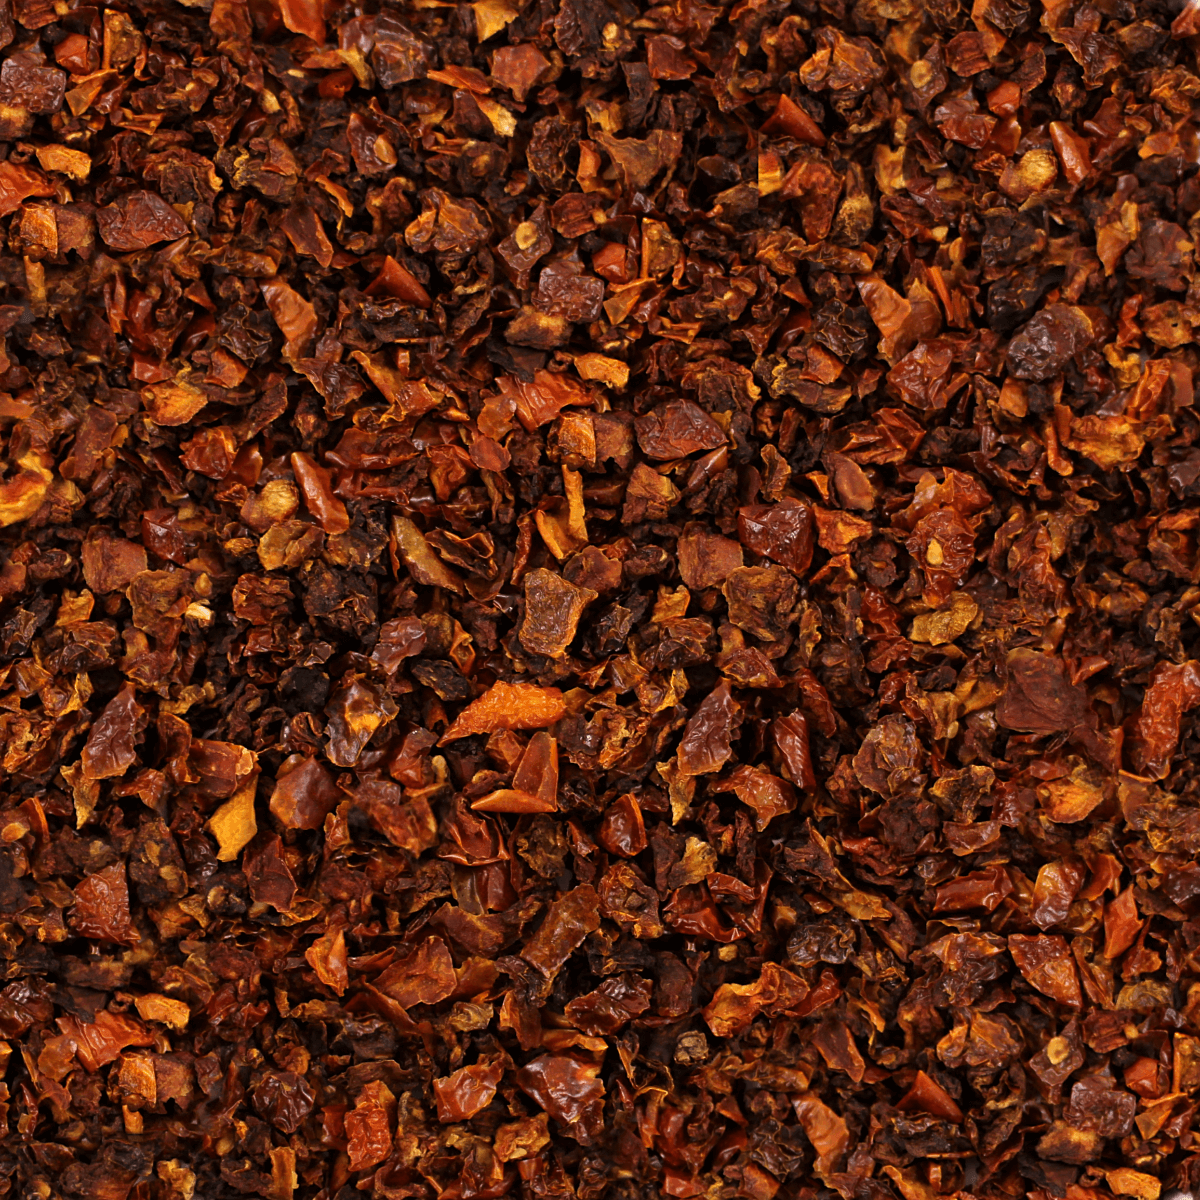 A close up image of a pile of brown spices, including Harmony House Dried Tomato Dices (32 oz).